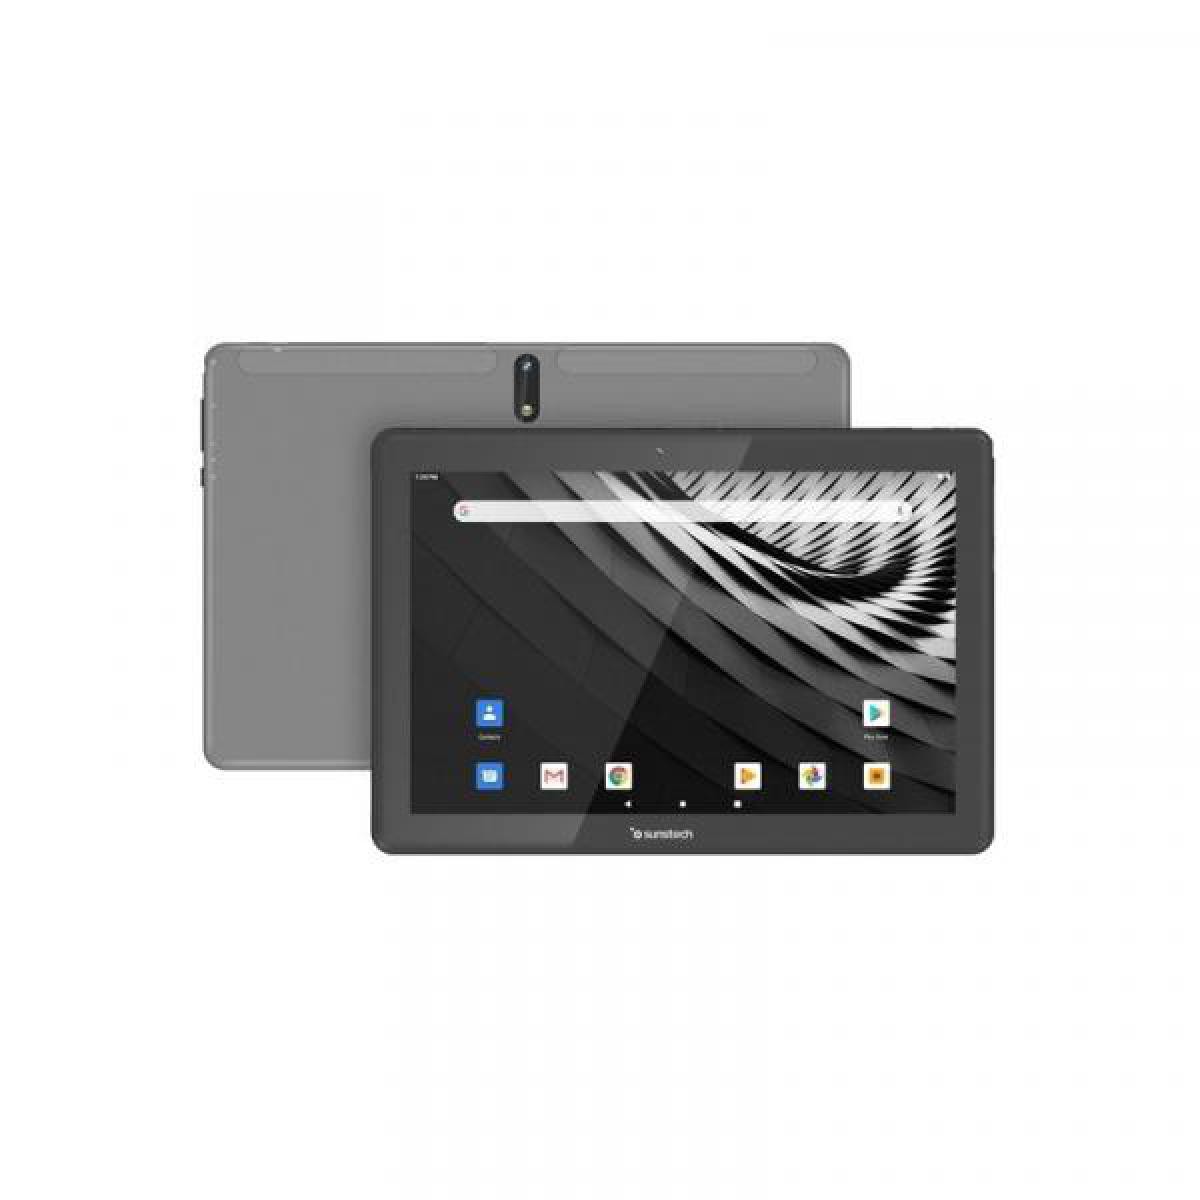 Sunstech - Sunstech Android 9.0 Pie GSM 10.1" - Tablette Android